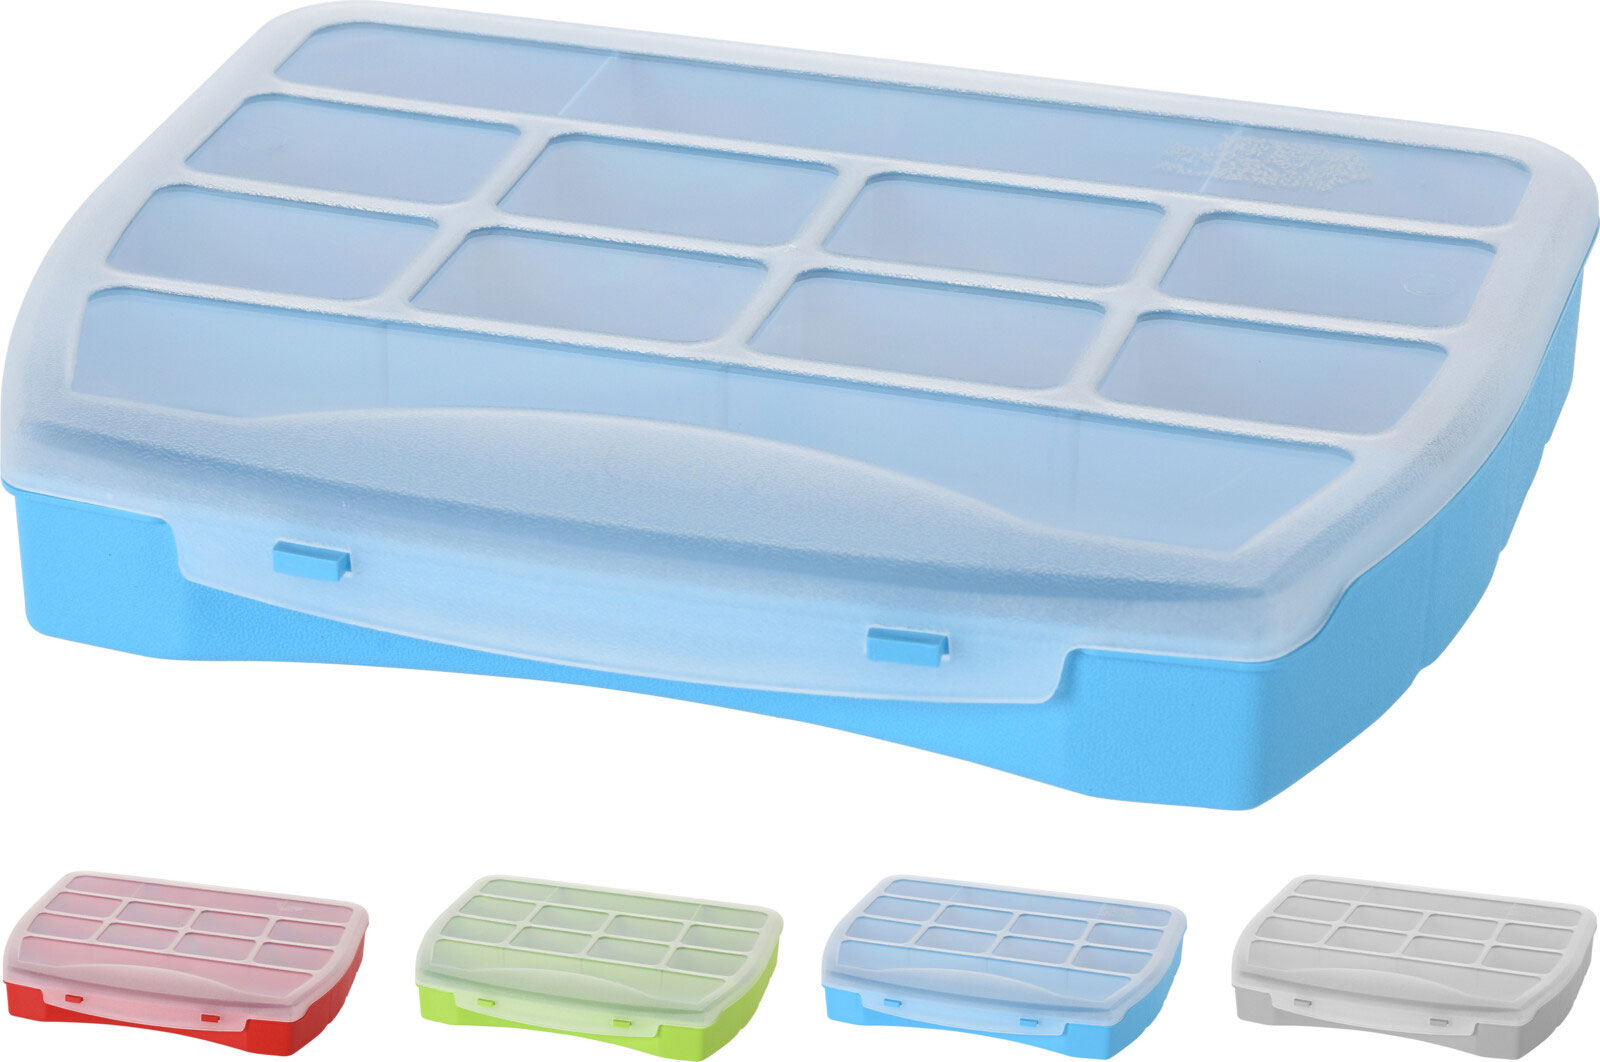 STORAGE BOX WITH 8 COMPARTMENTS 4 ASSORTED COLORS